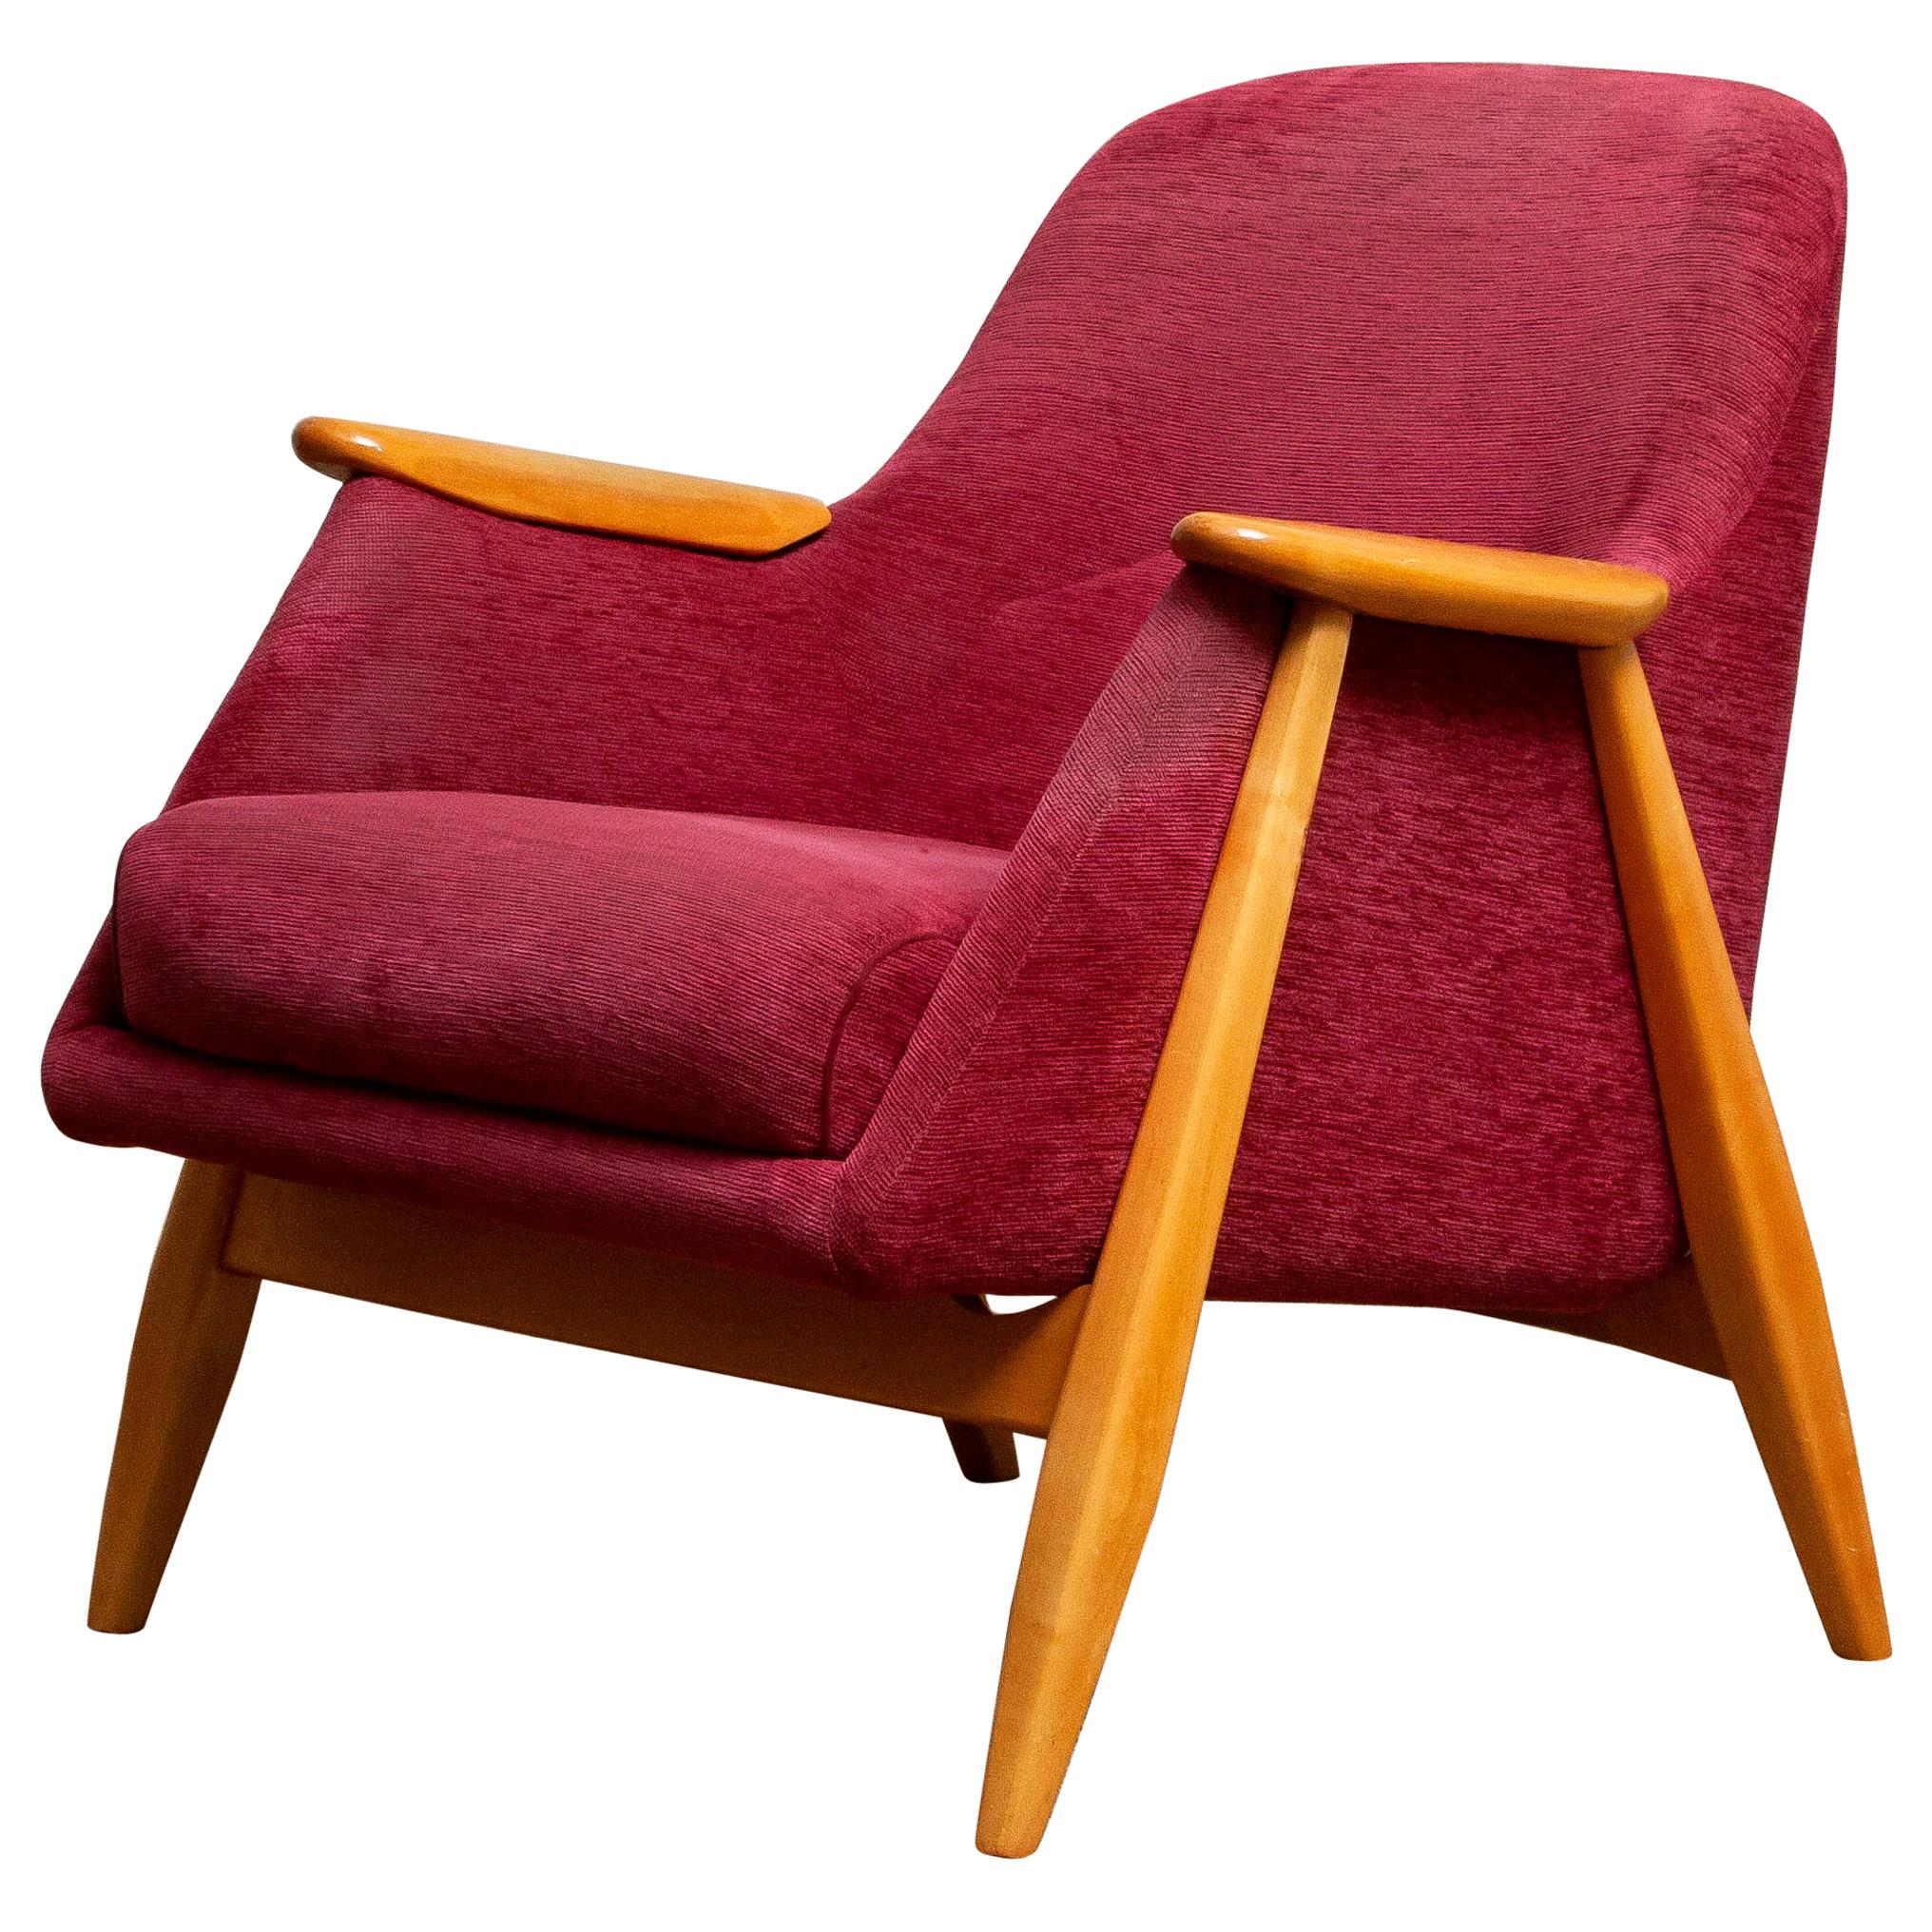 Very nice arm / easy chair designed by Svante Skogh for Asko, Finland.
This chair is made of beech and original dark pink chenille/baby-roy fabric.
It is in a good condition.
Period: 1950s
Dimensions: H.75 cm, W.70 cm, D.66 cm.